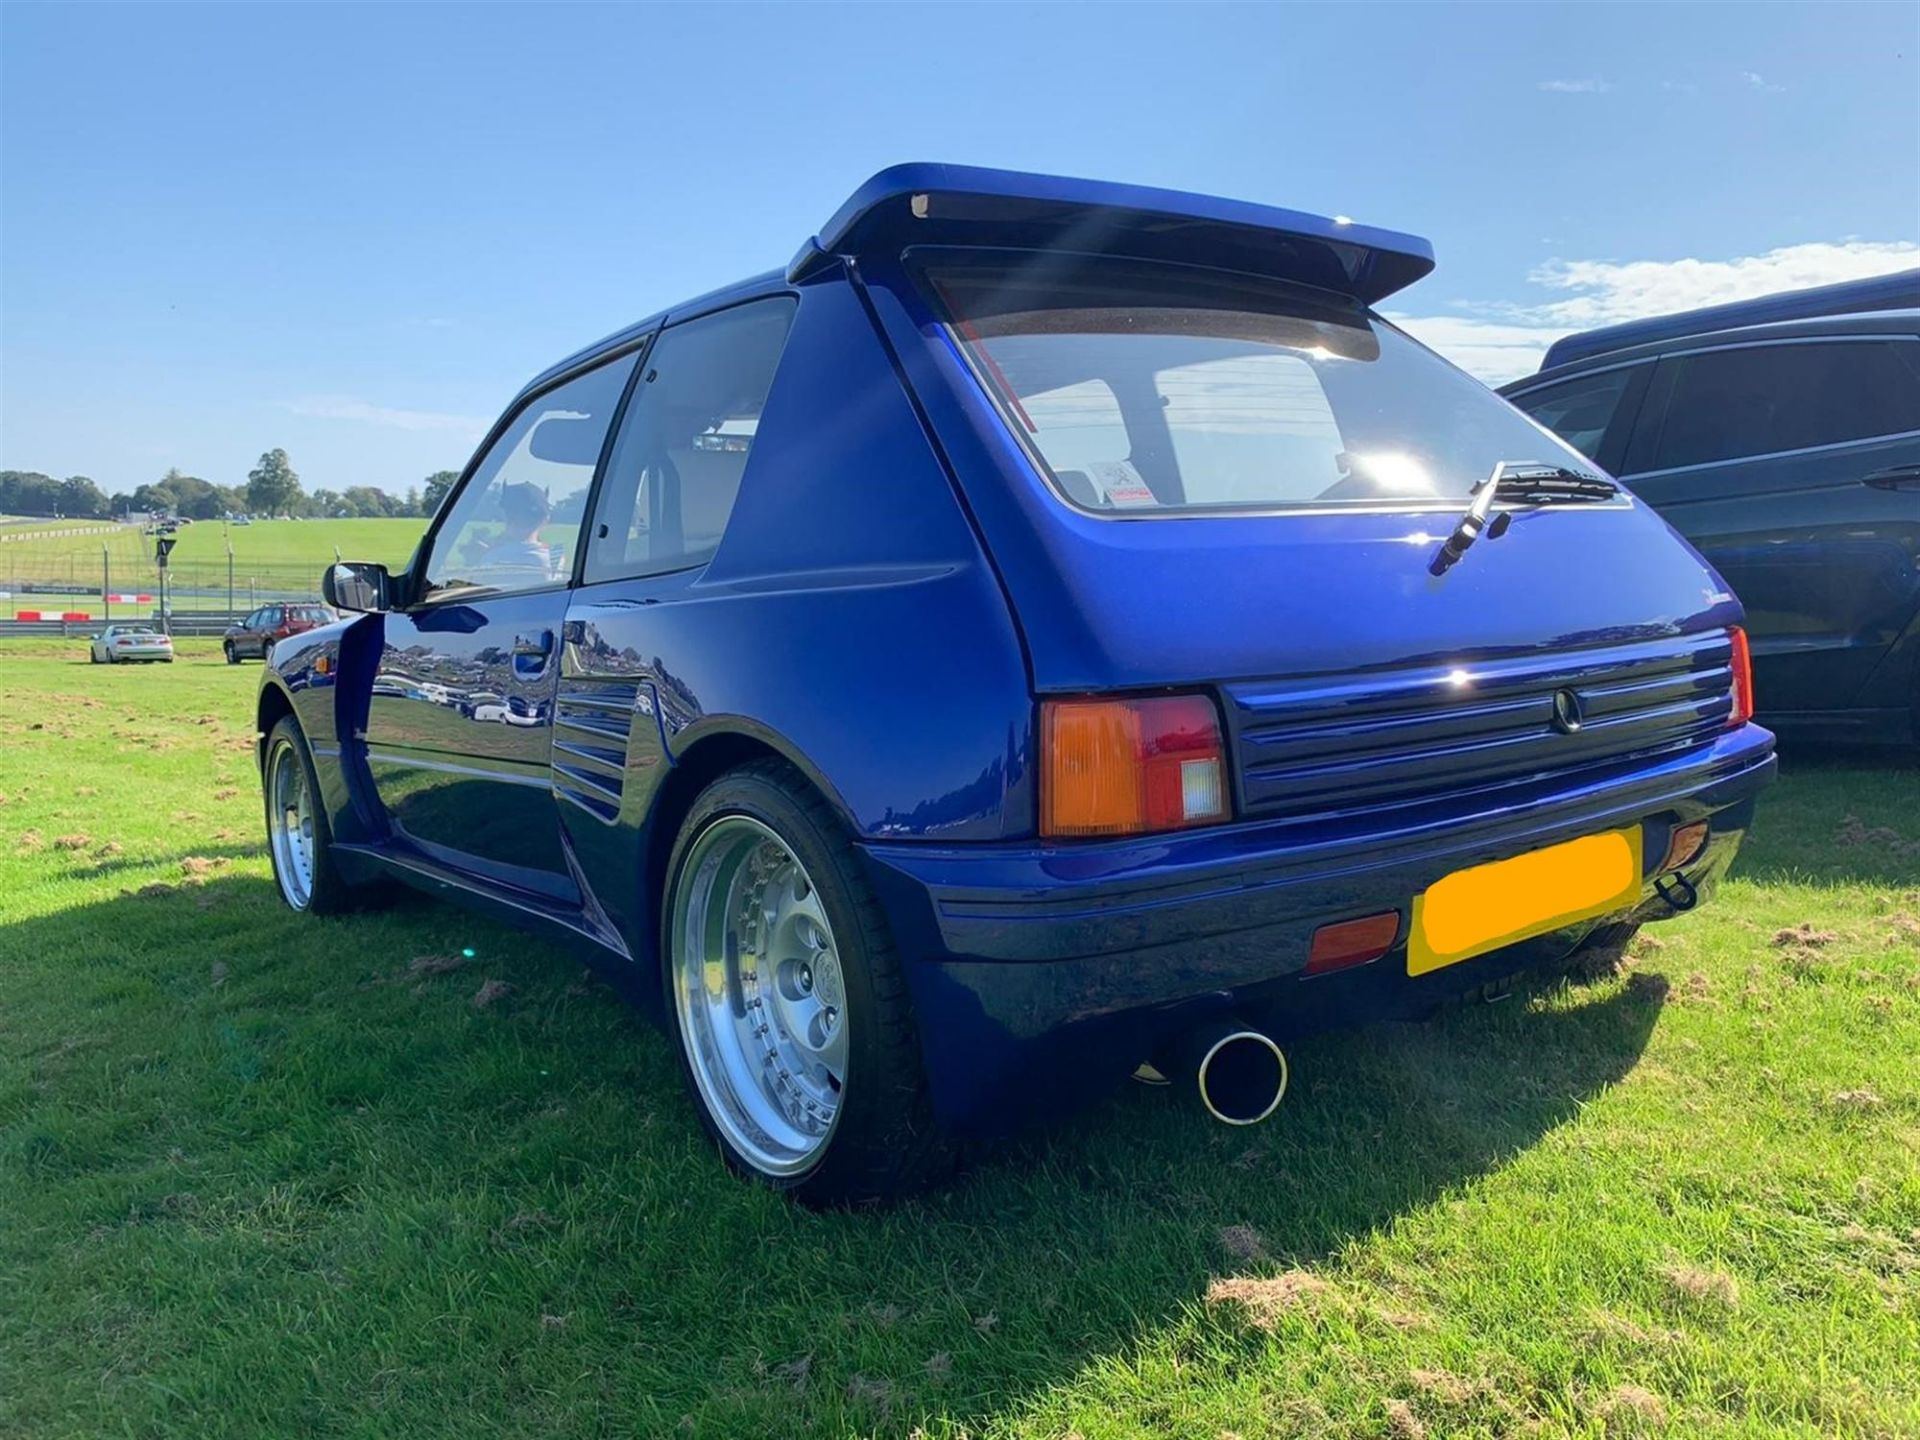 1988 Peugeot 205 1.9 GTI Dimma - Image 4 of 13